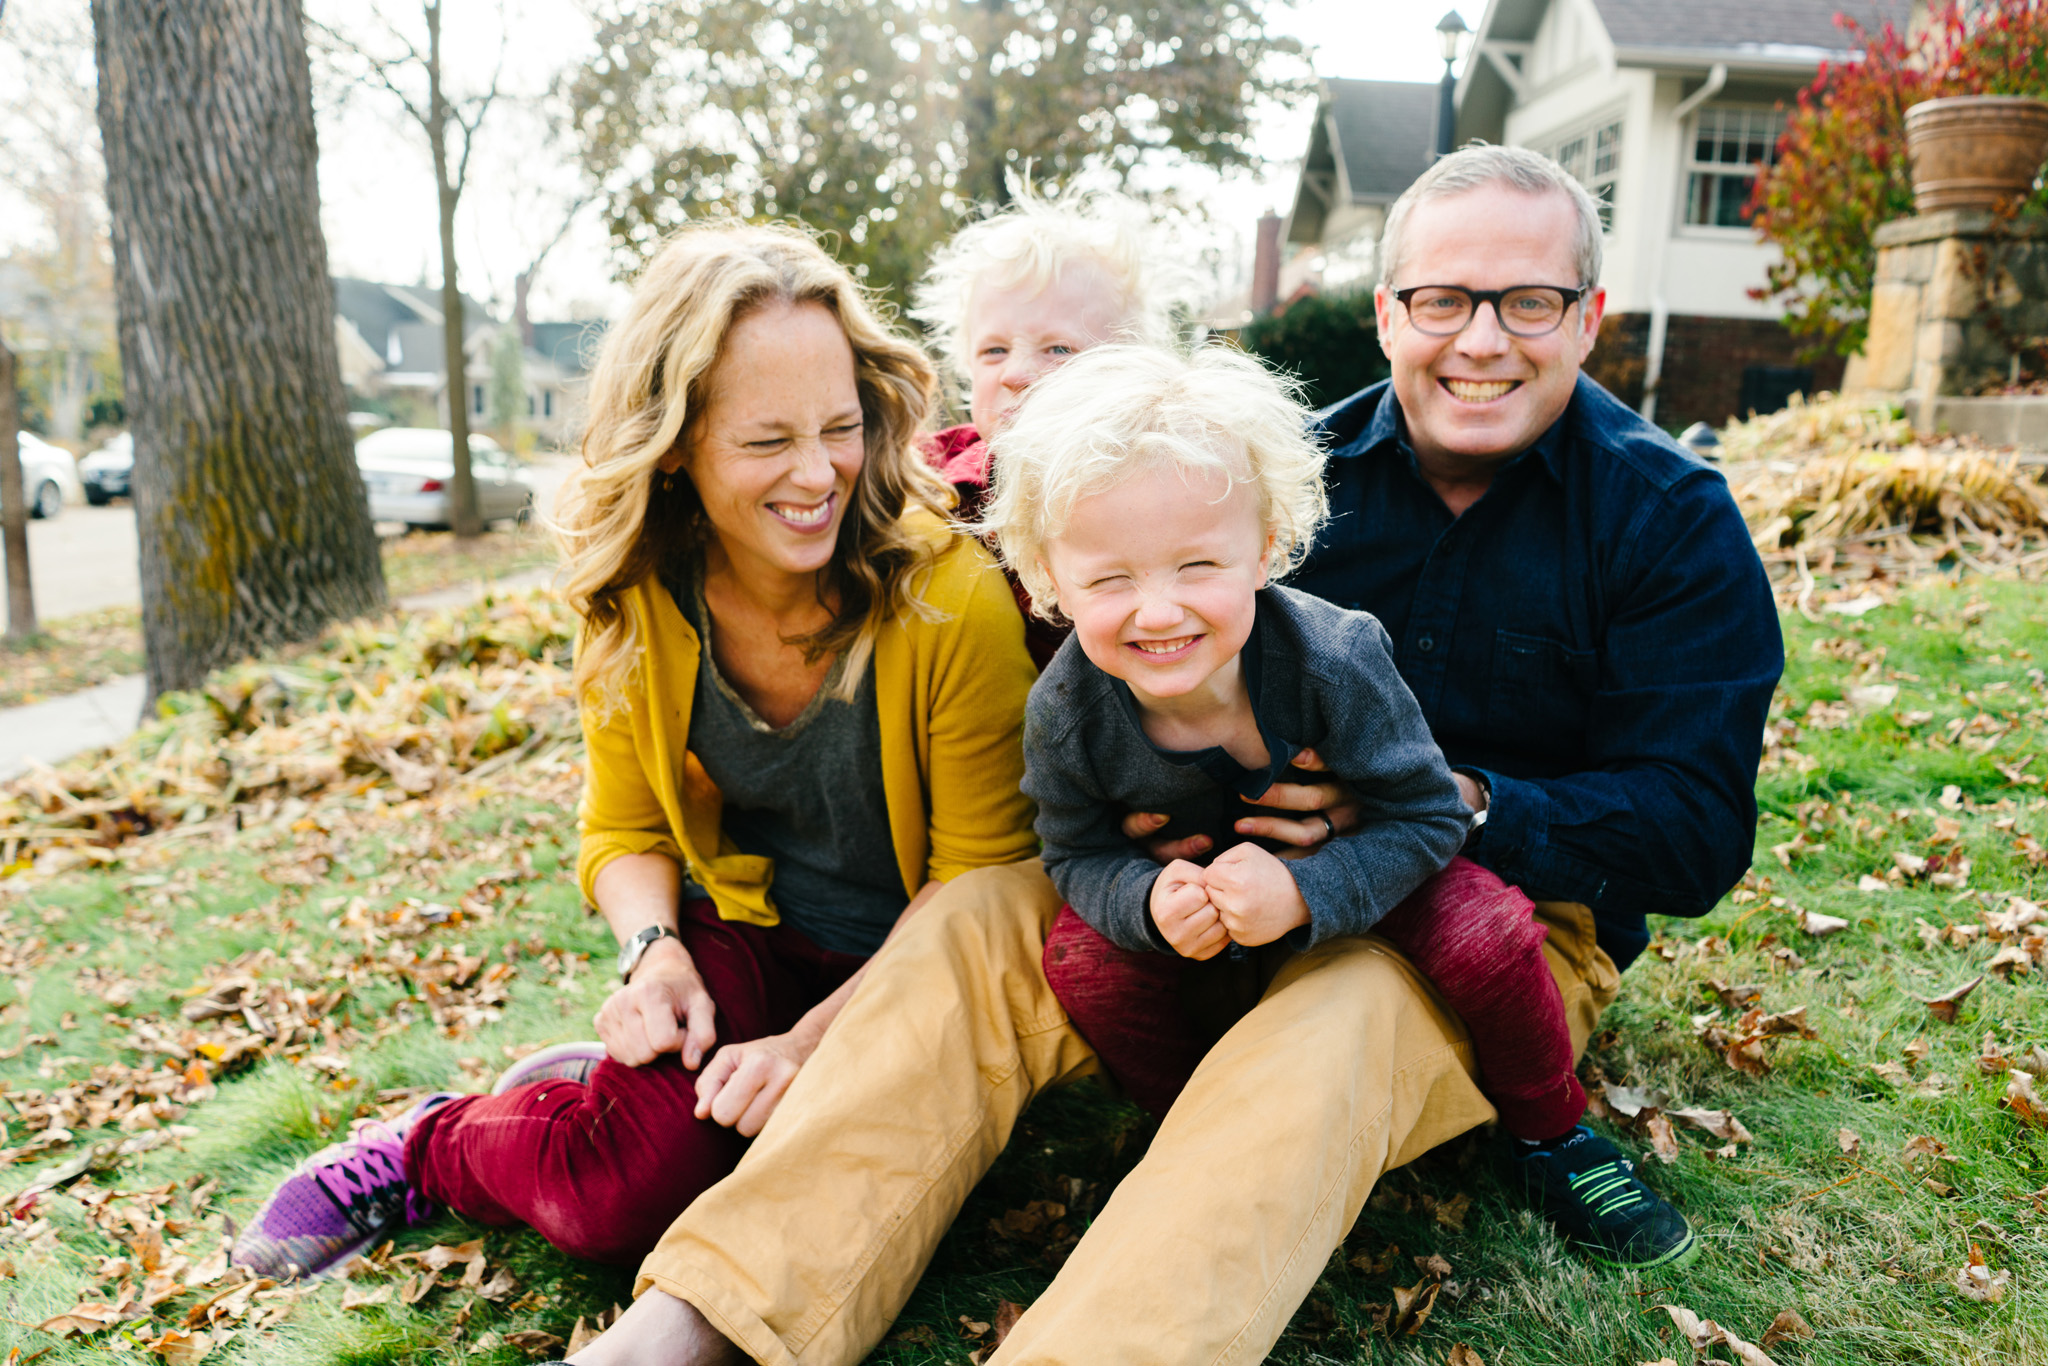 Minneapolis Family Photography at Home